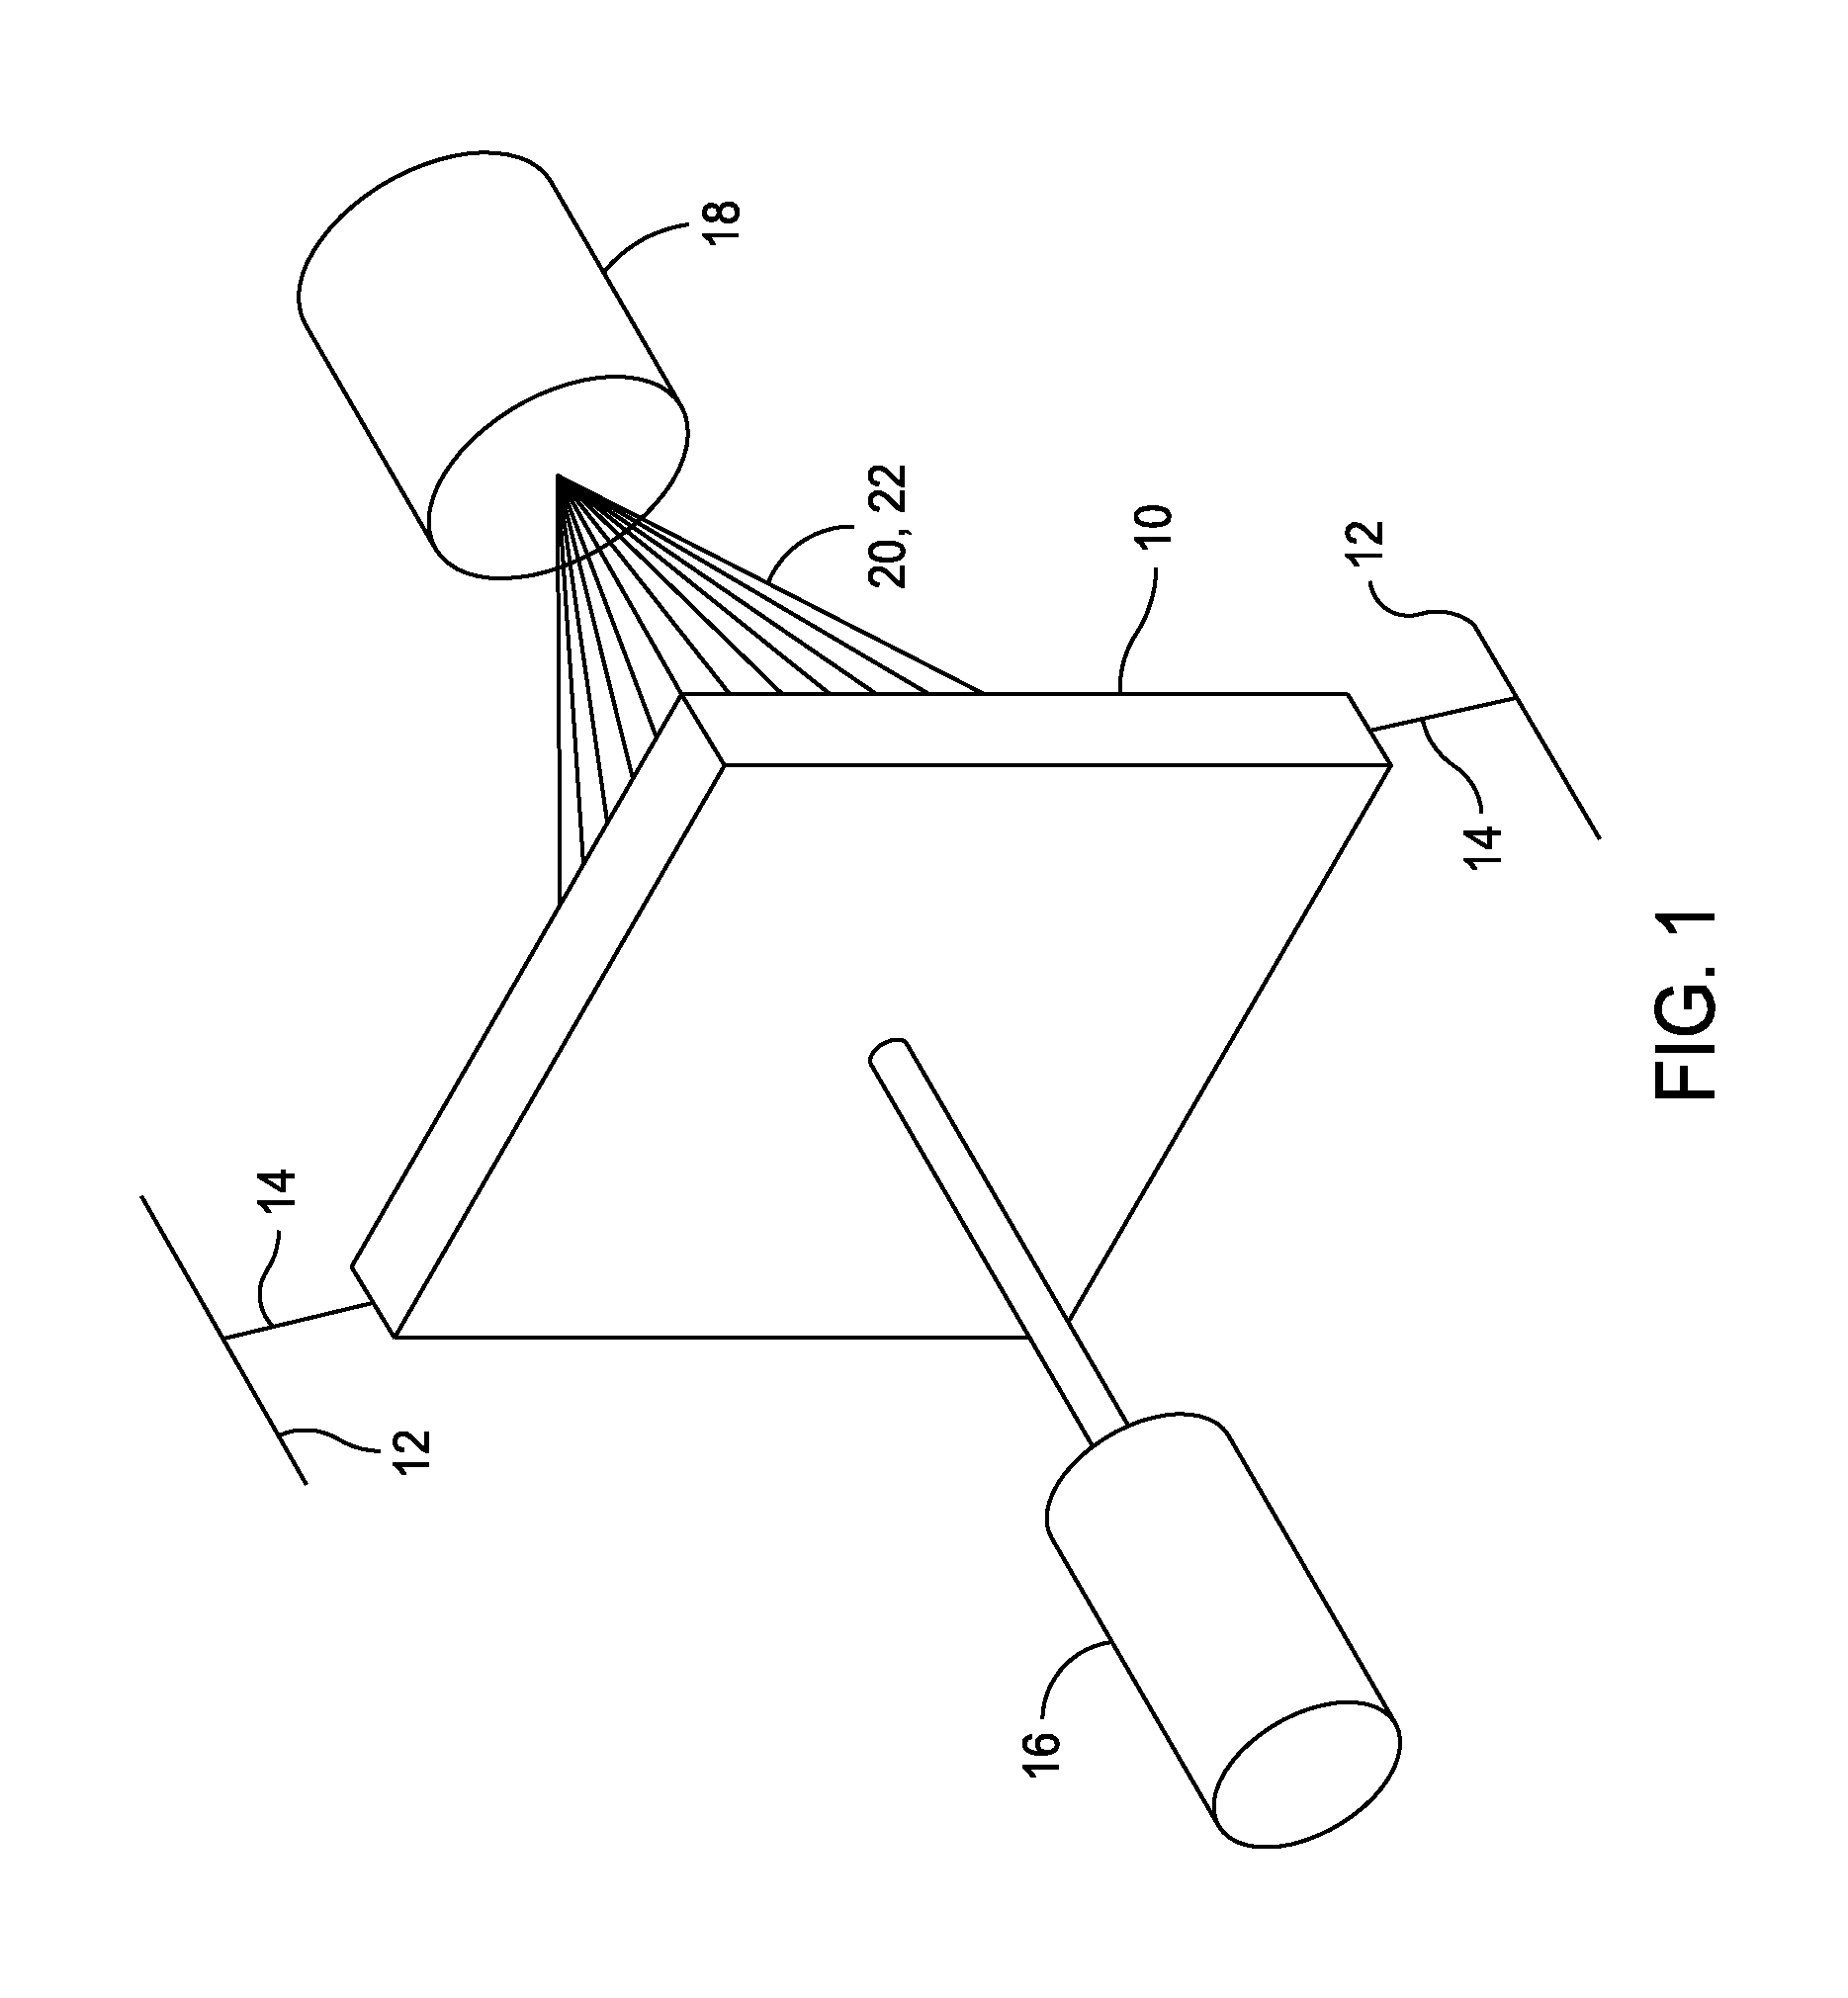 Method for measuring shear wavespeed in an isotropic plate